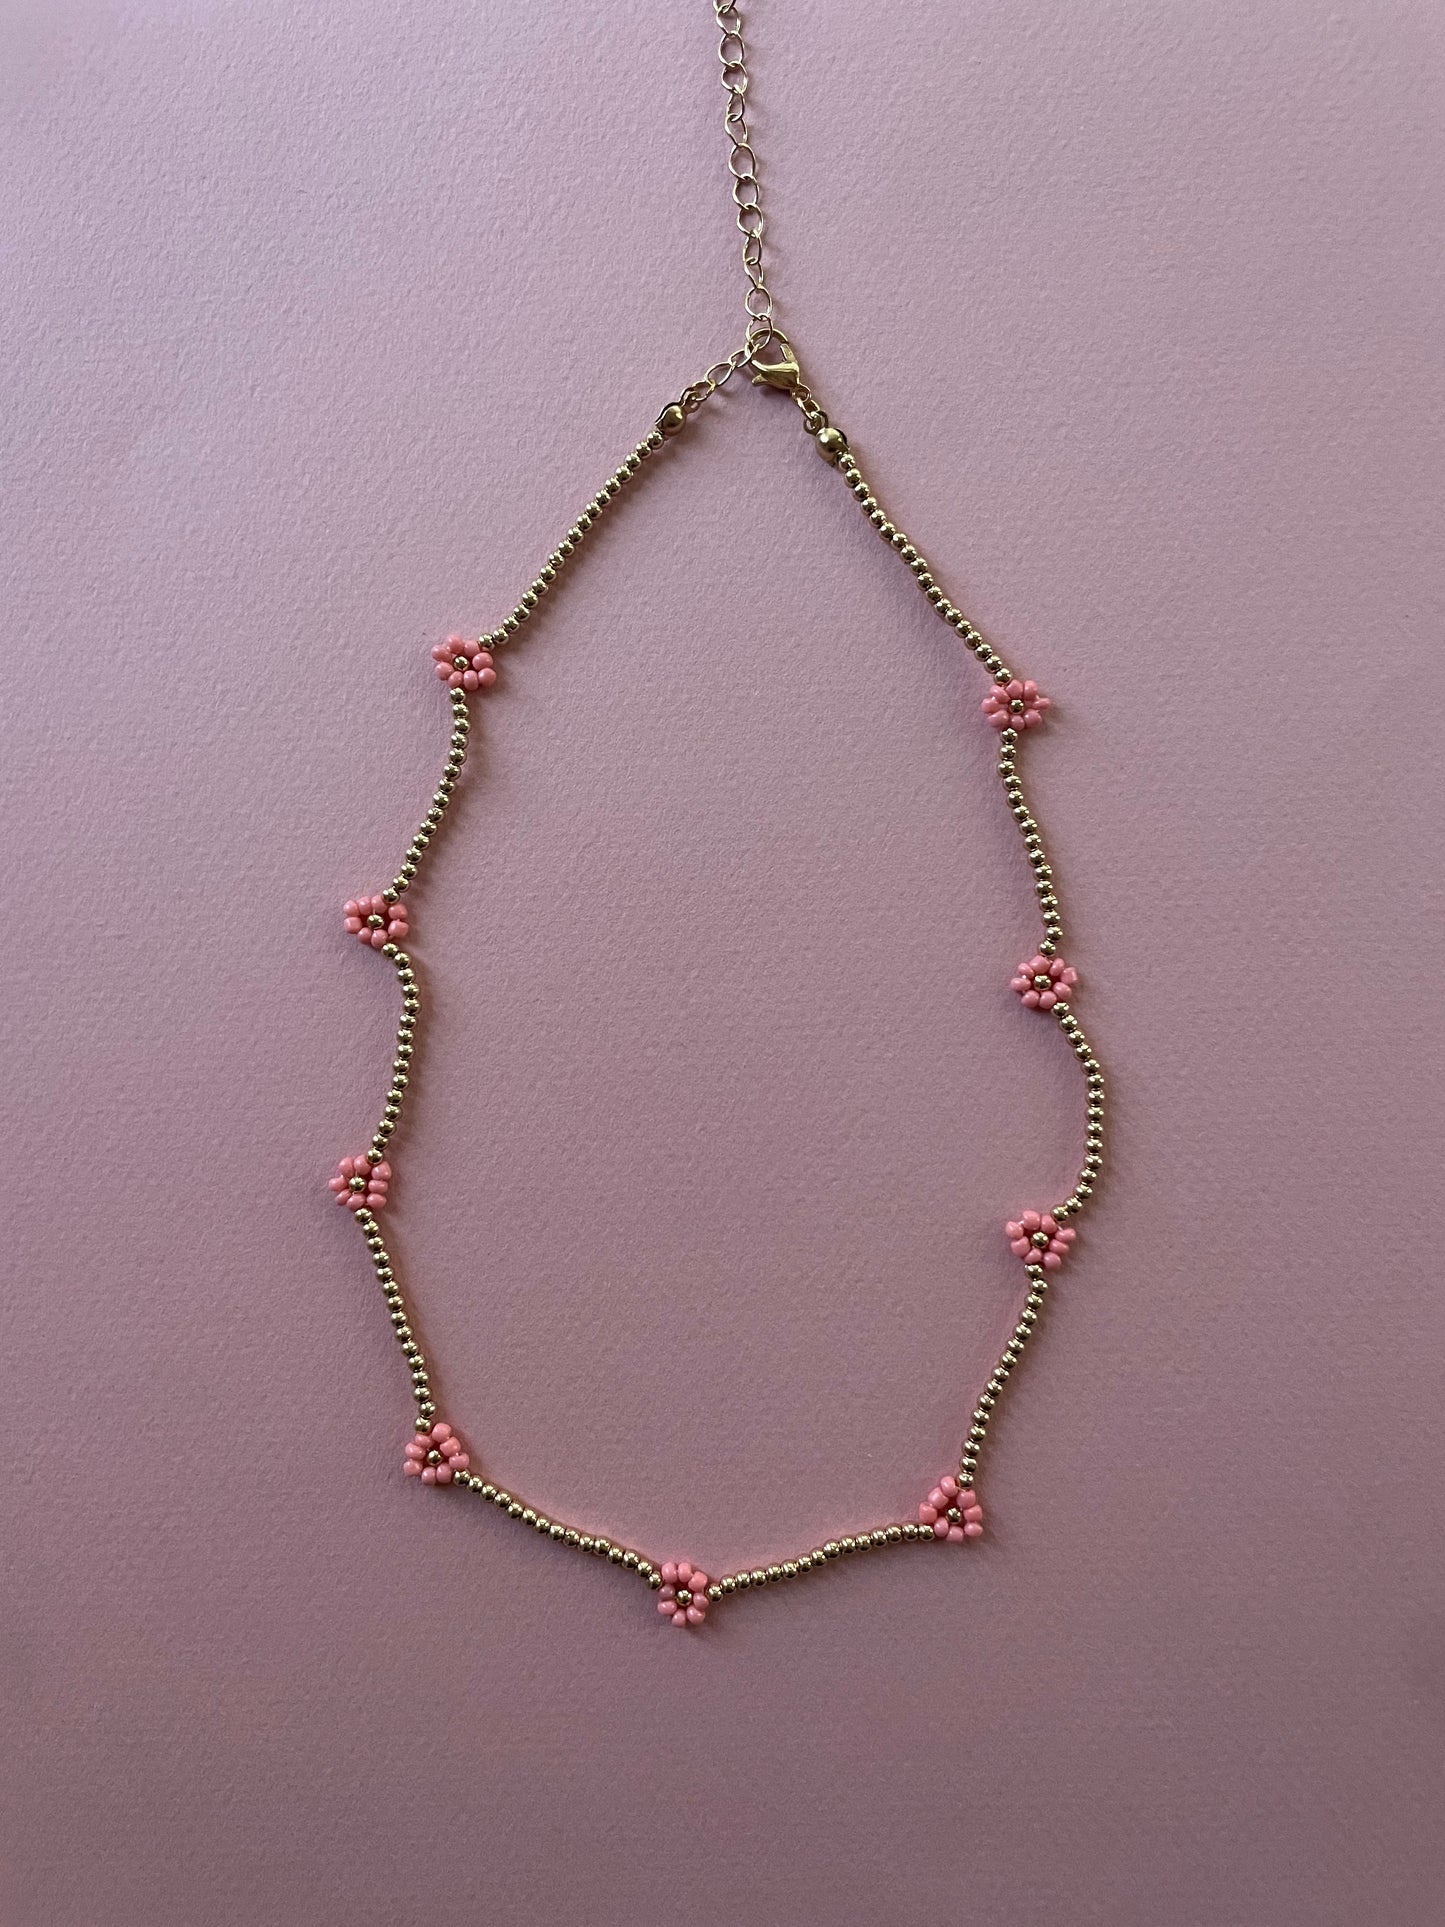 Pink Flower Beaded Necklace